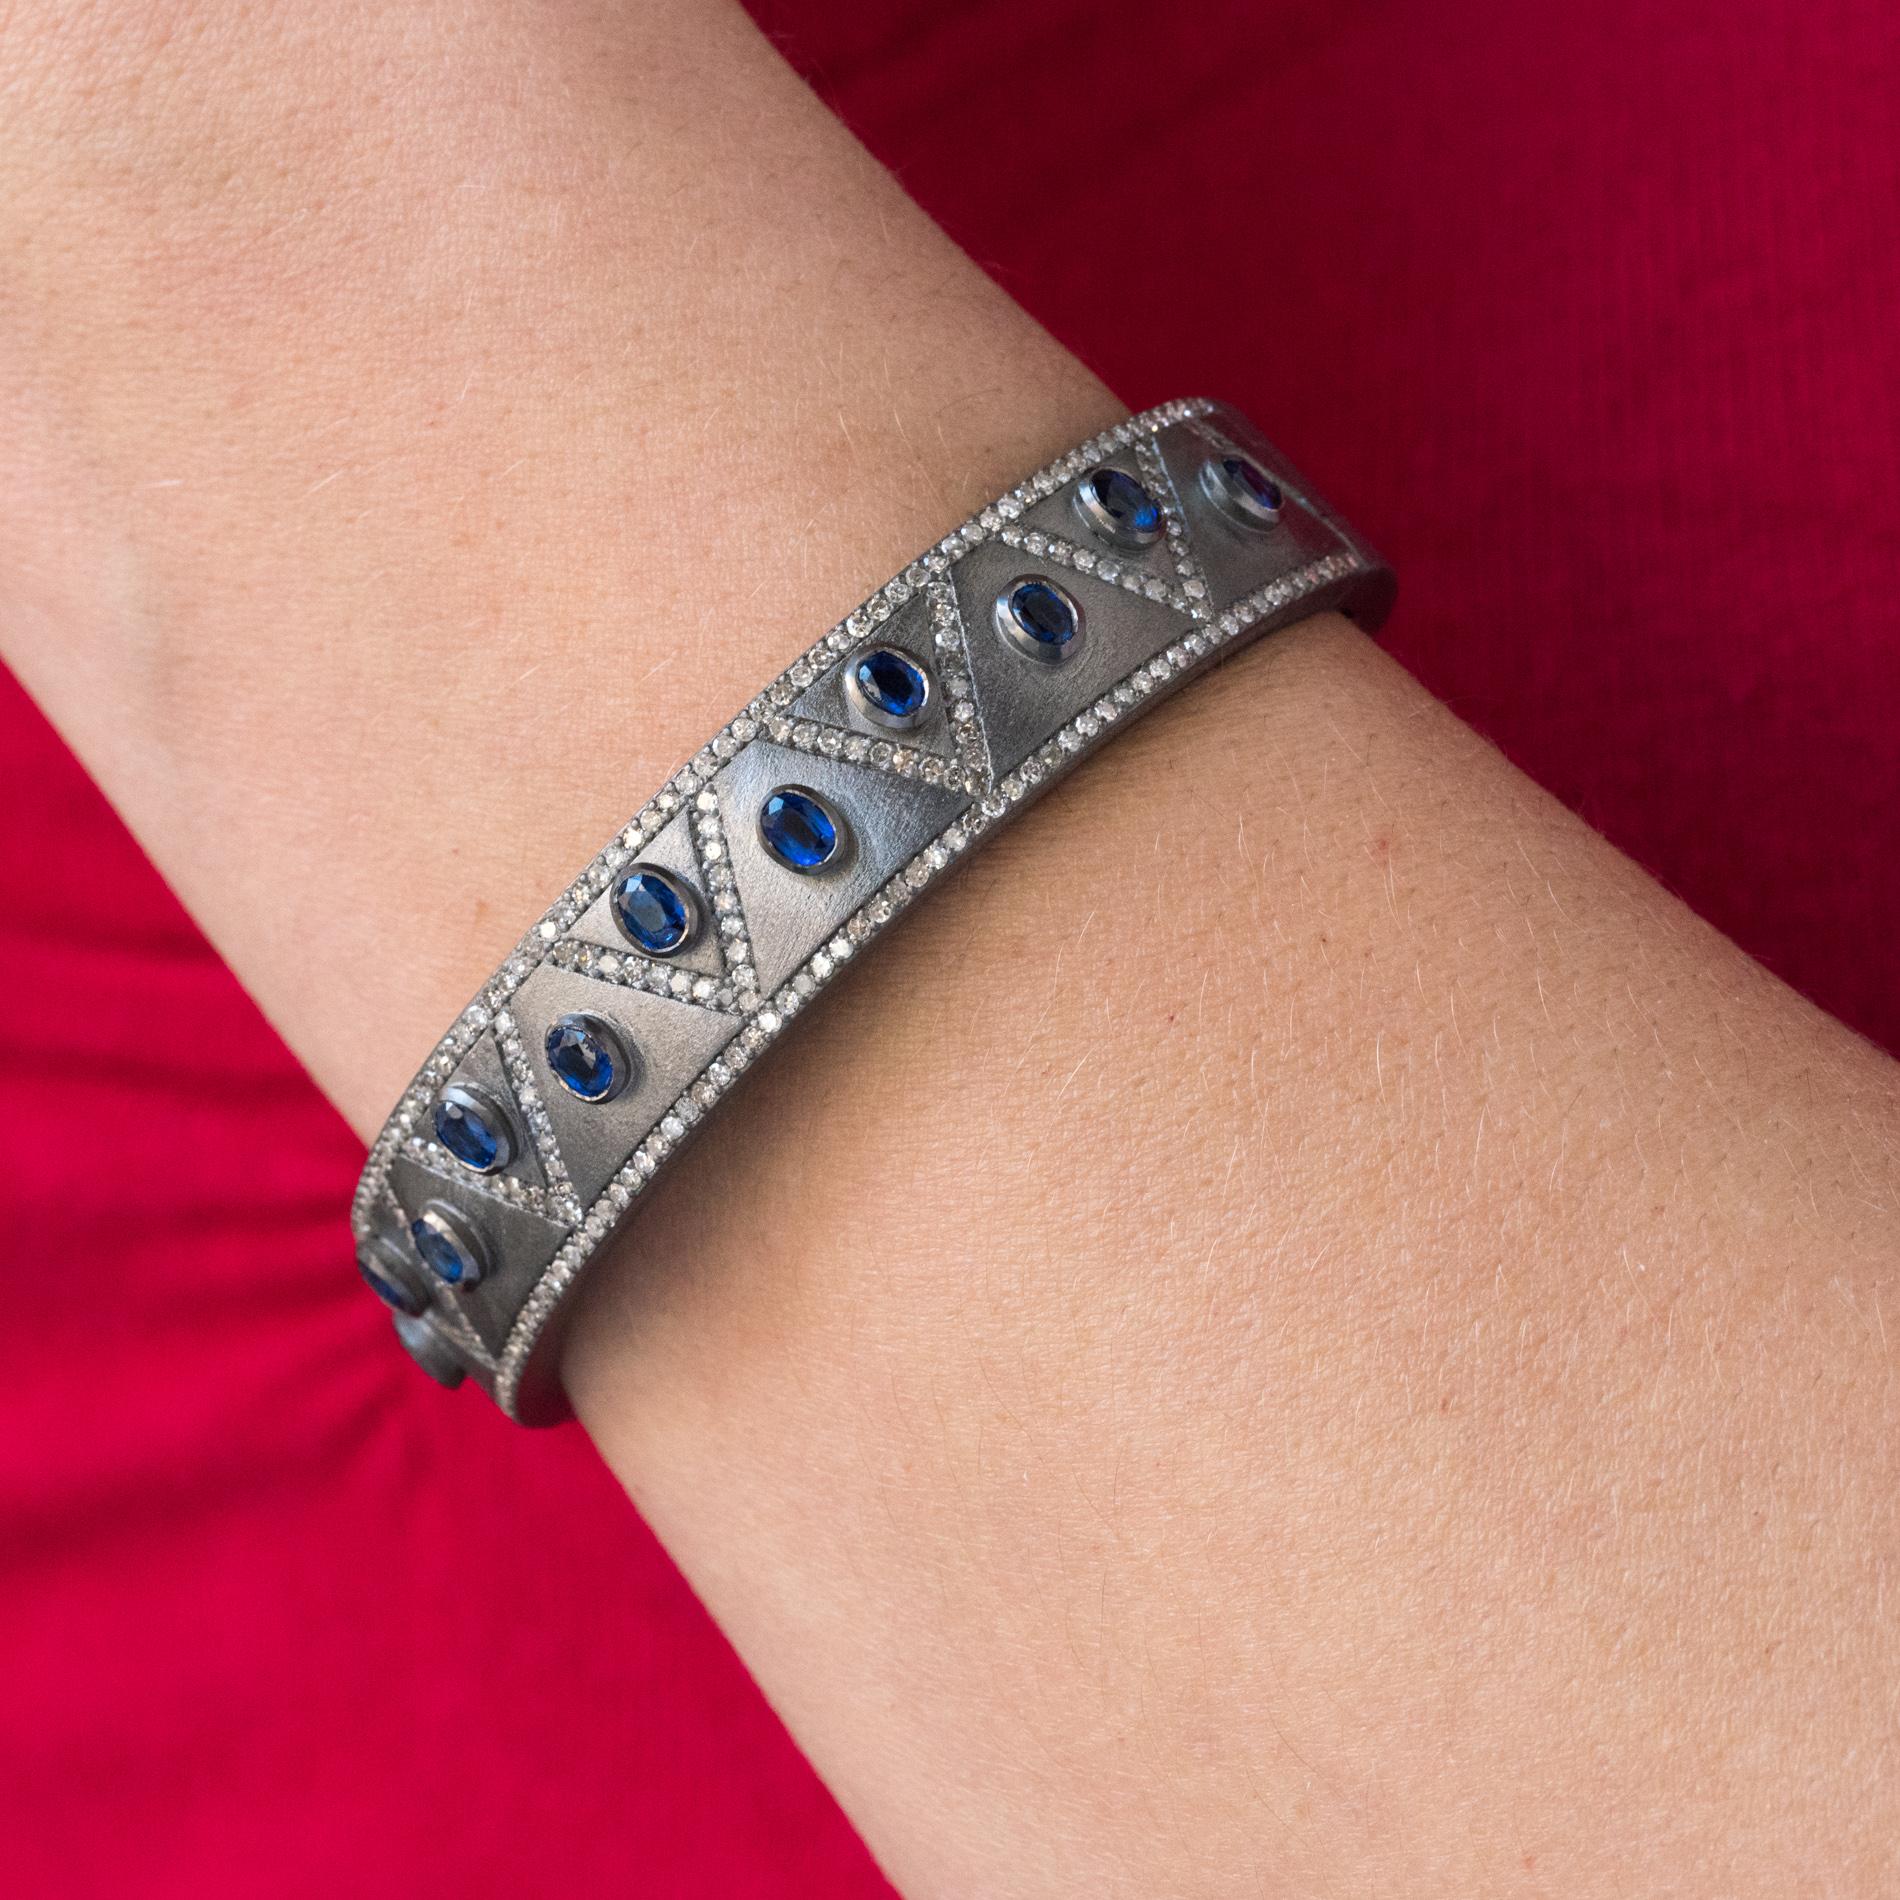 Bangle bracelet in silver, grayed and matified.
Rigid, this silver bracelet is adorned on its top with herringbone patterns set with diamonds including on the borders. 11 oval blue closed- set cyanites separate these motifs. The interior is